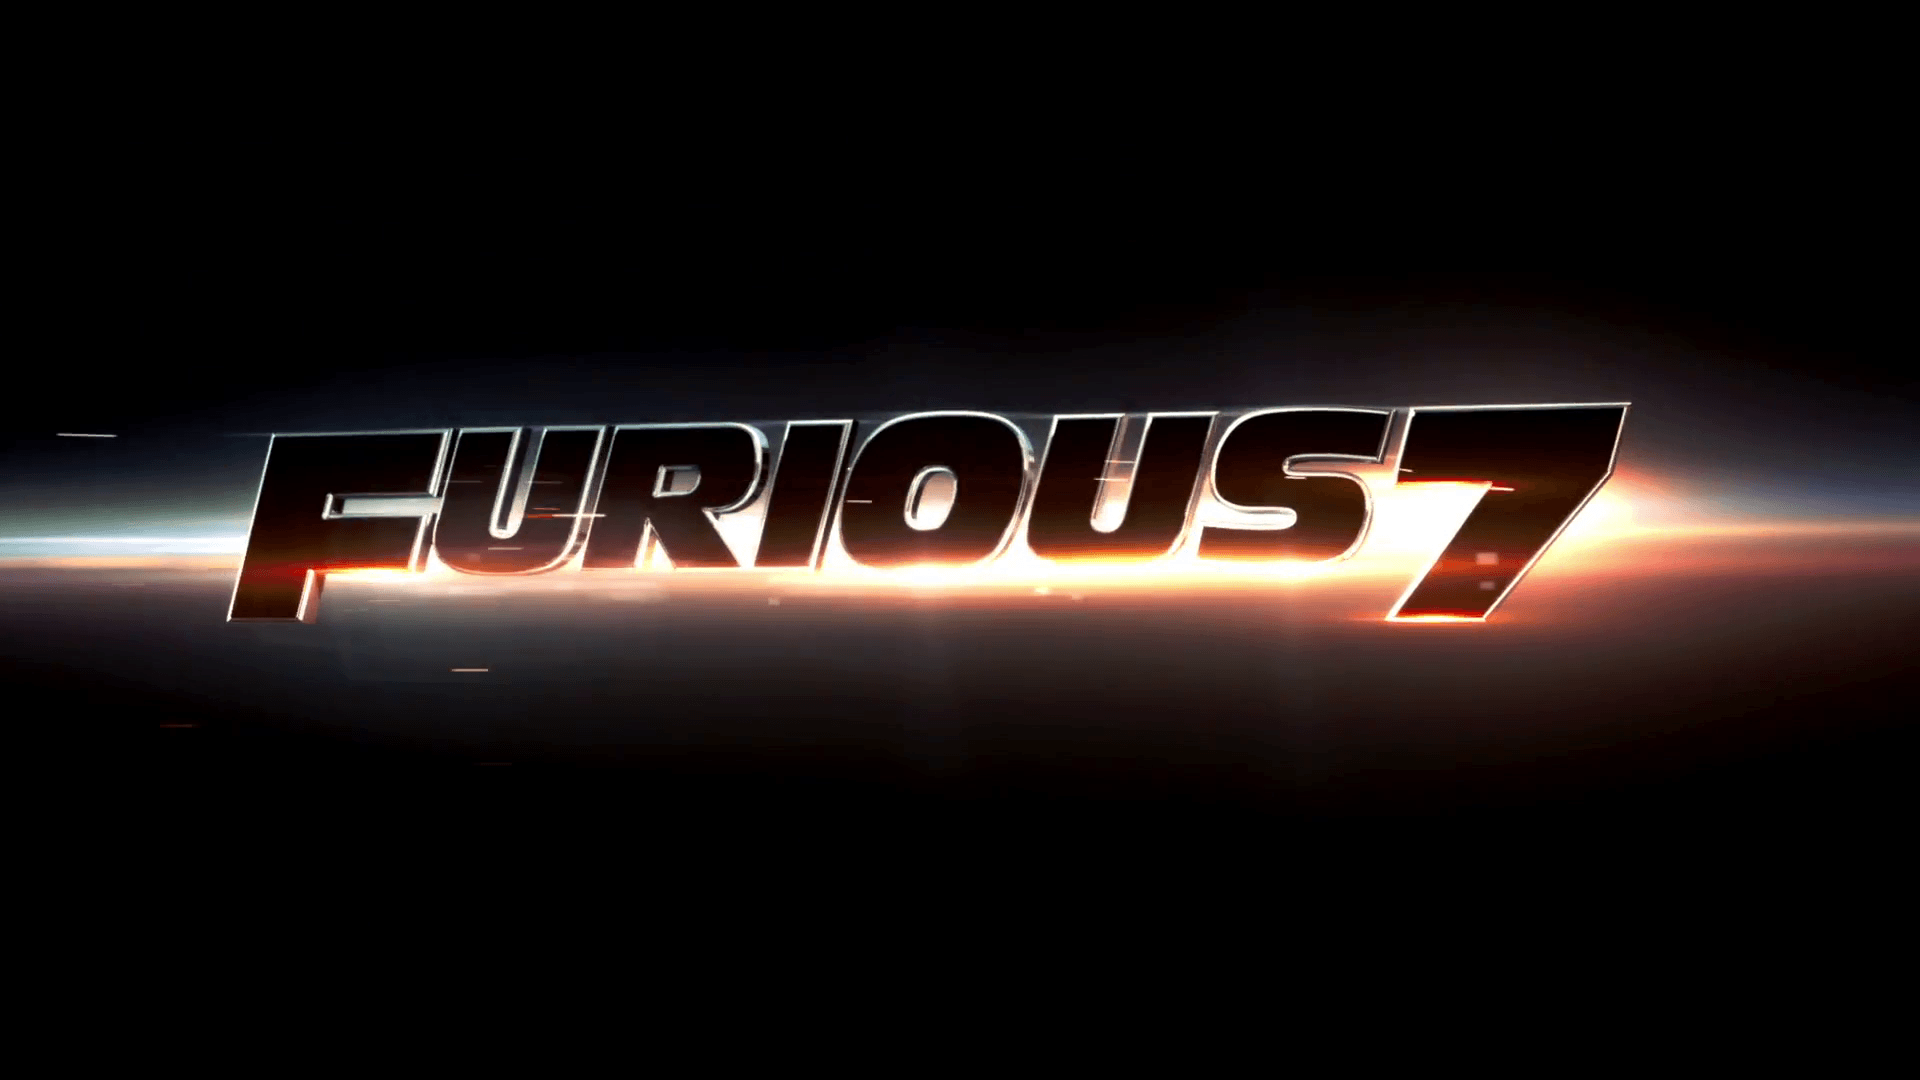 Fast and furious 7 Wallpaper free download. Fast And Furious. Fast